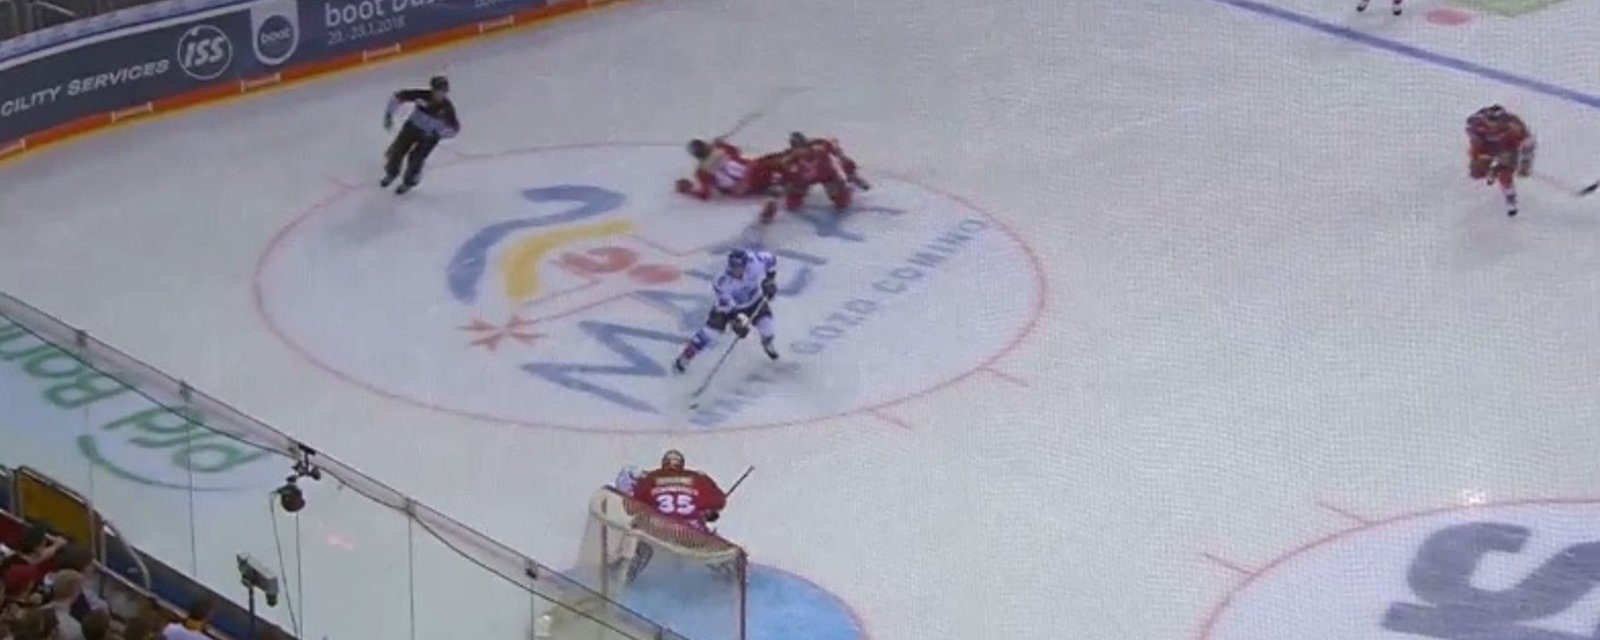 Must See: Former NHLer scores crazy goal in German hockey league